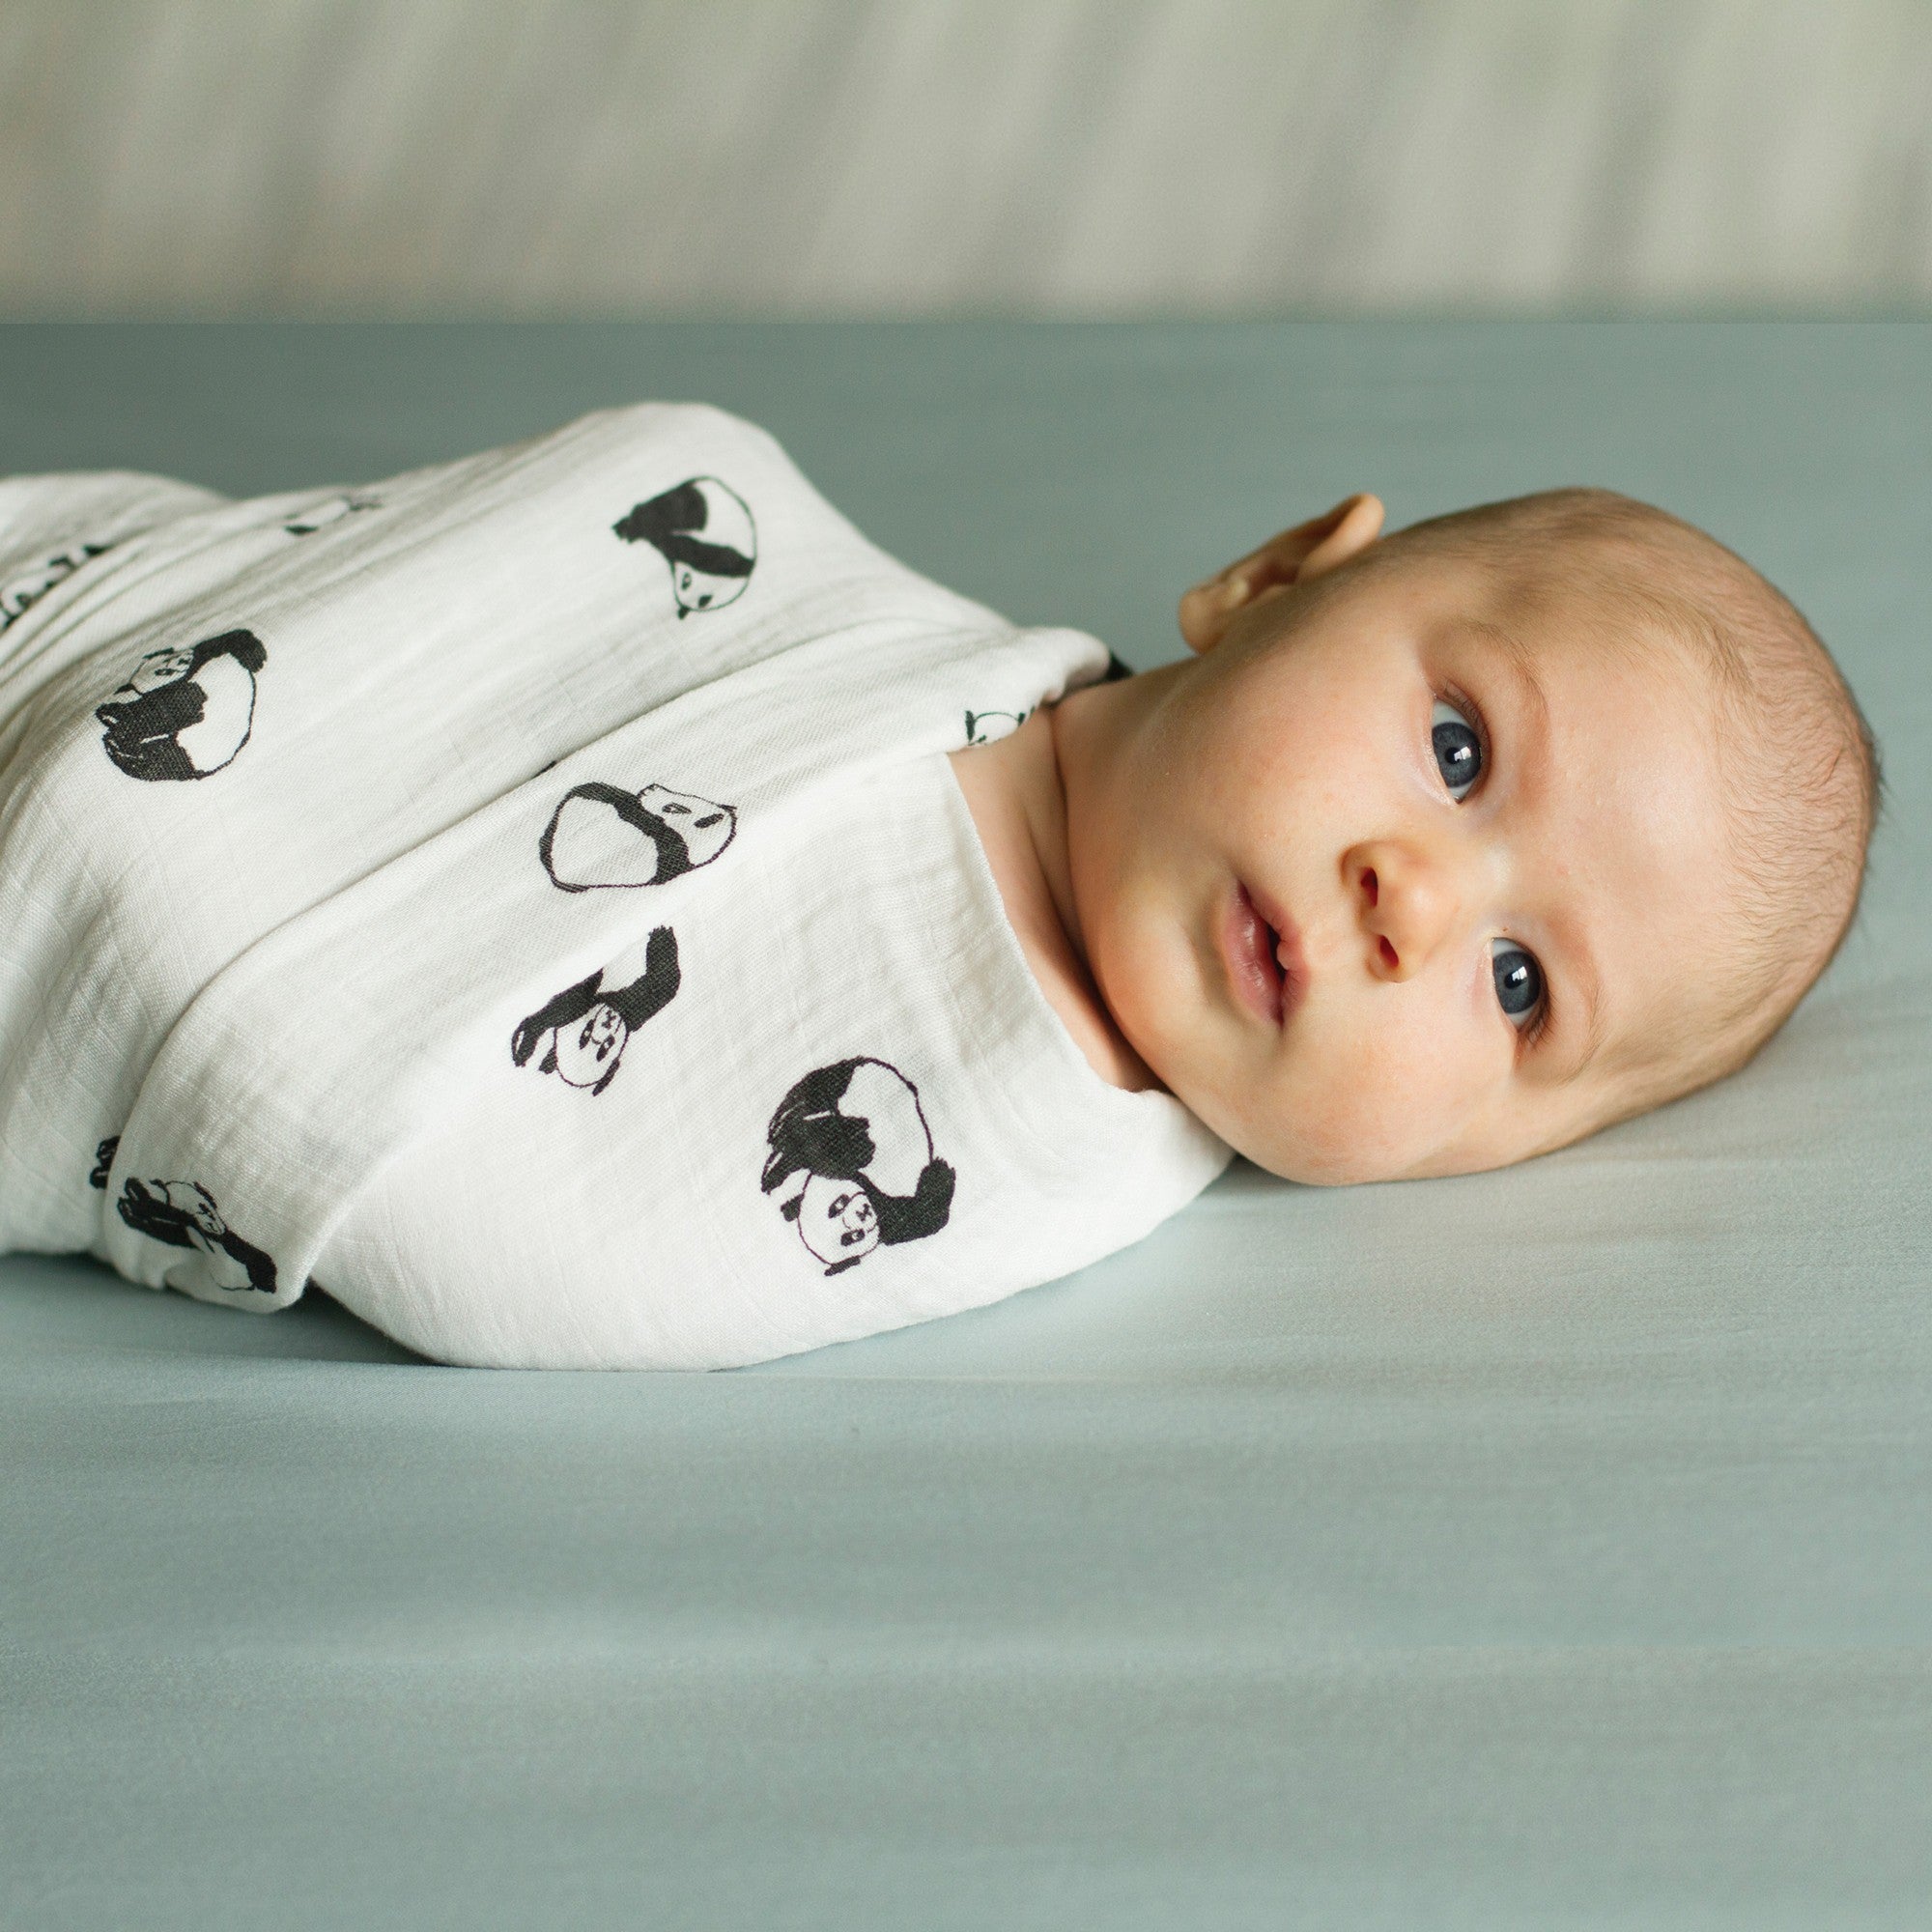 BAMBOO Muslin Swaddle - Silky-Soft, Hypoallergenic and Breathable, Baby Feel Secure - Organically made from Bamboo - Panda